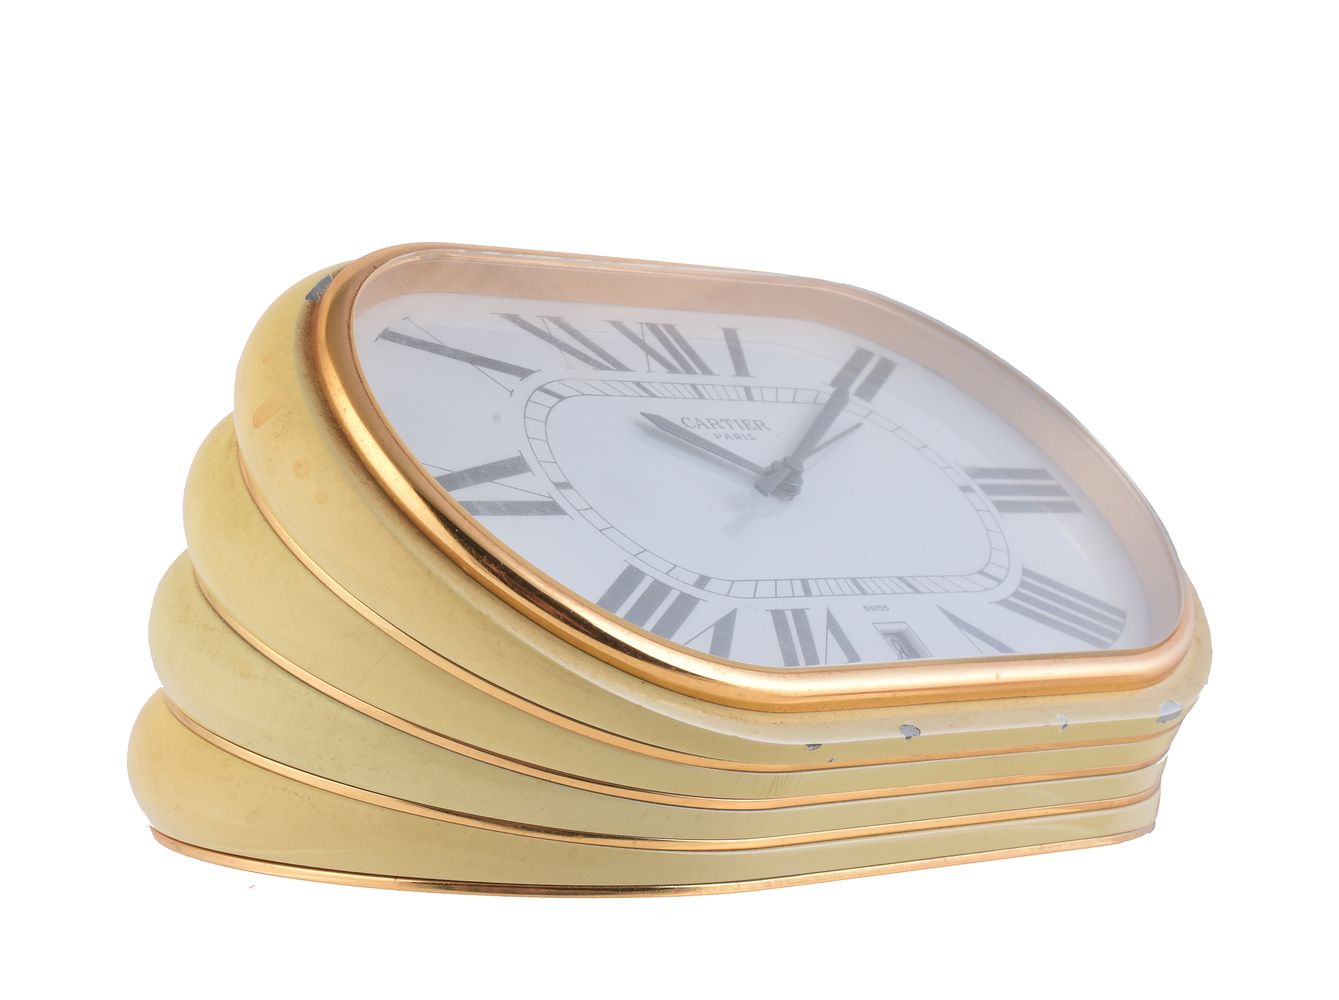 Must De Cartier, Ref. 7531 01011, a faux ivory cased table clock - Image 2 of 3